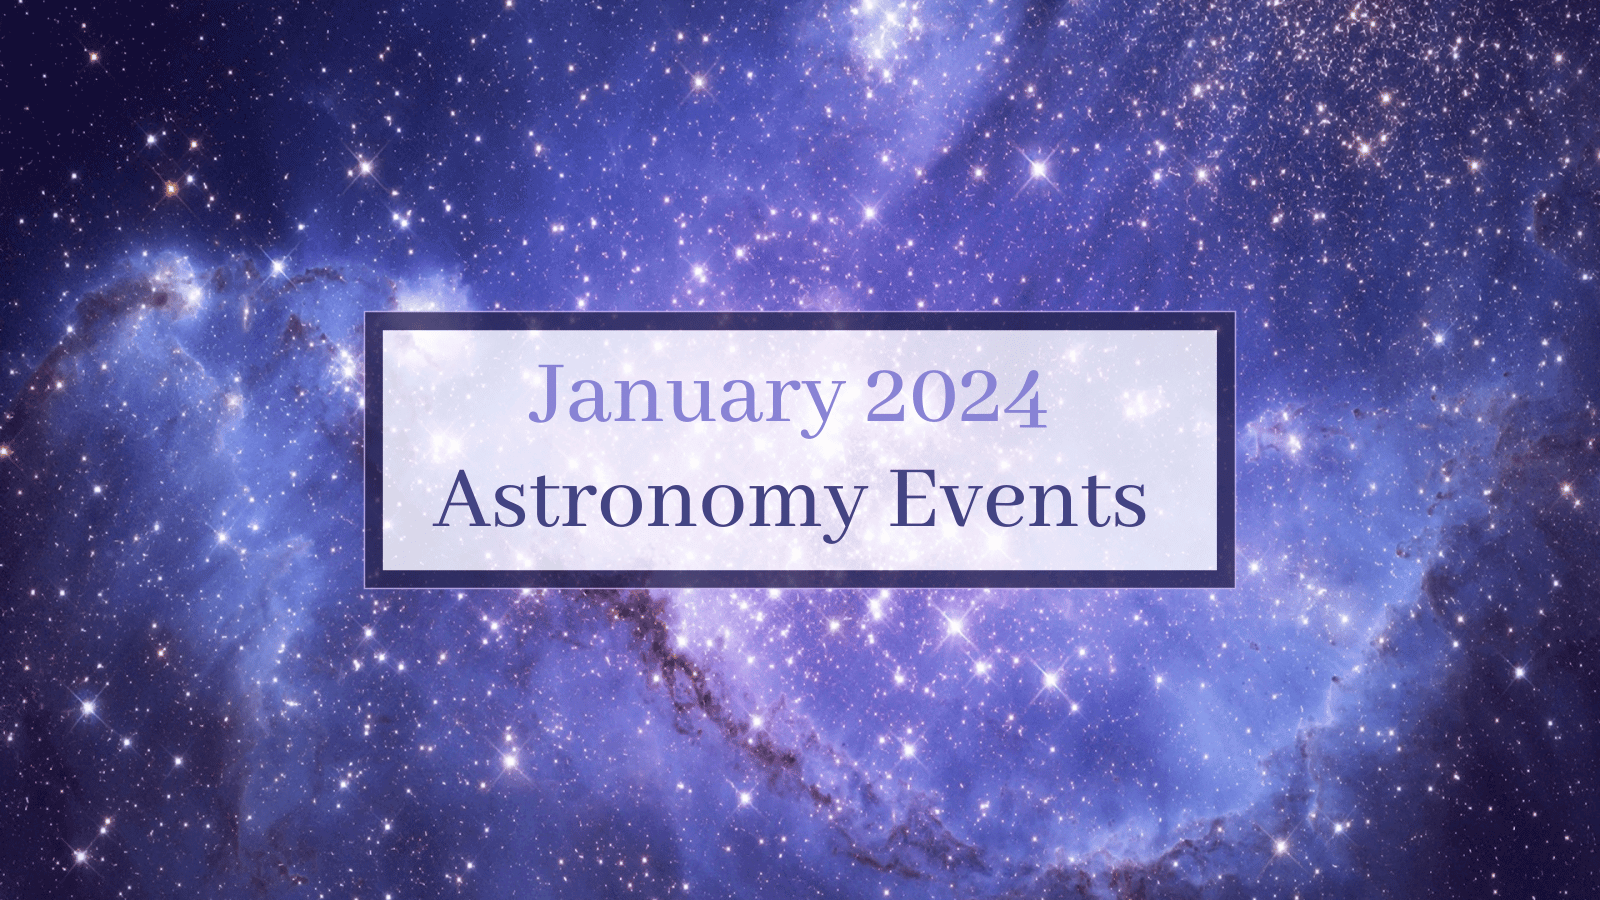 January 2024 Astronomy Events